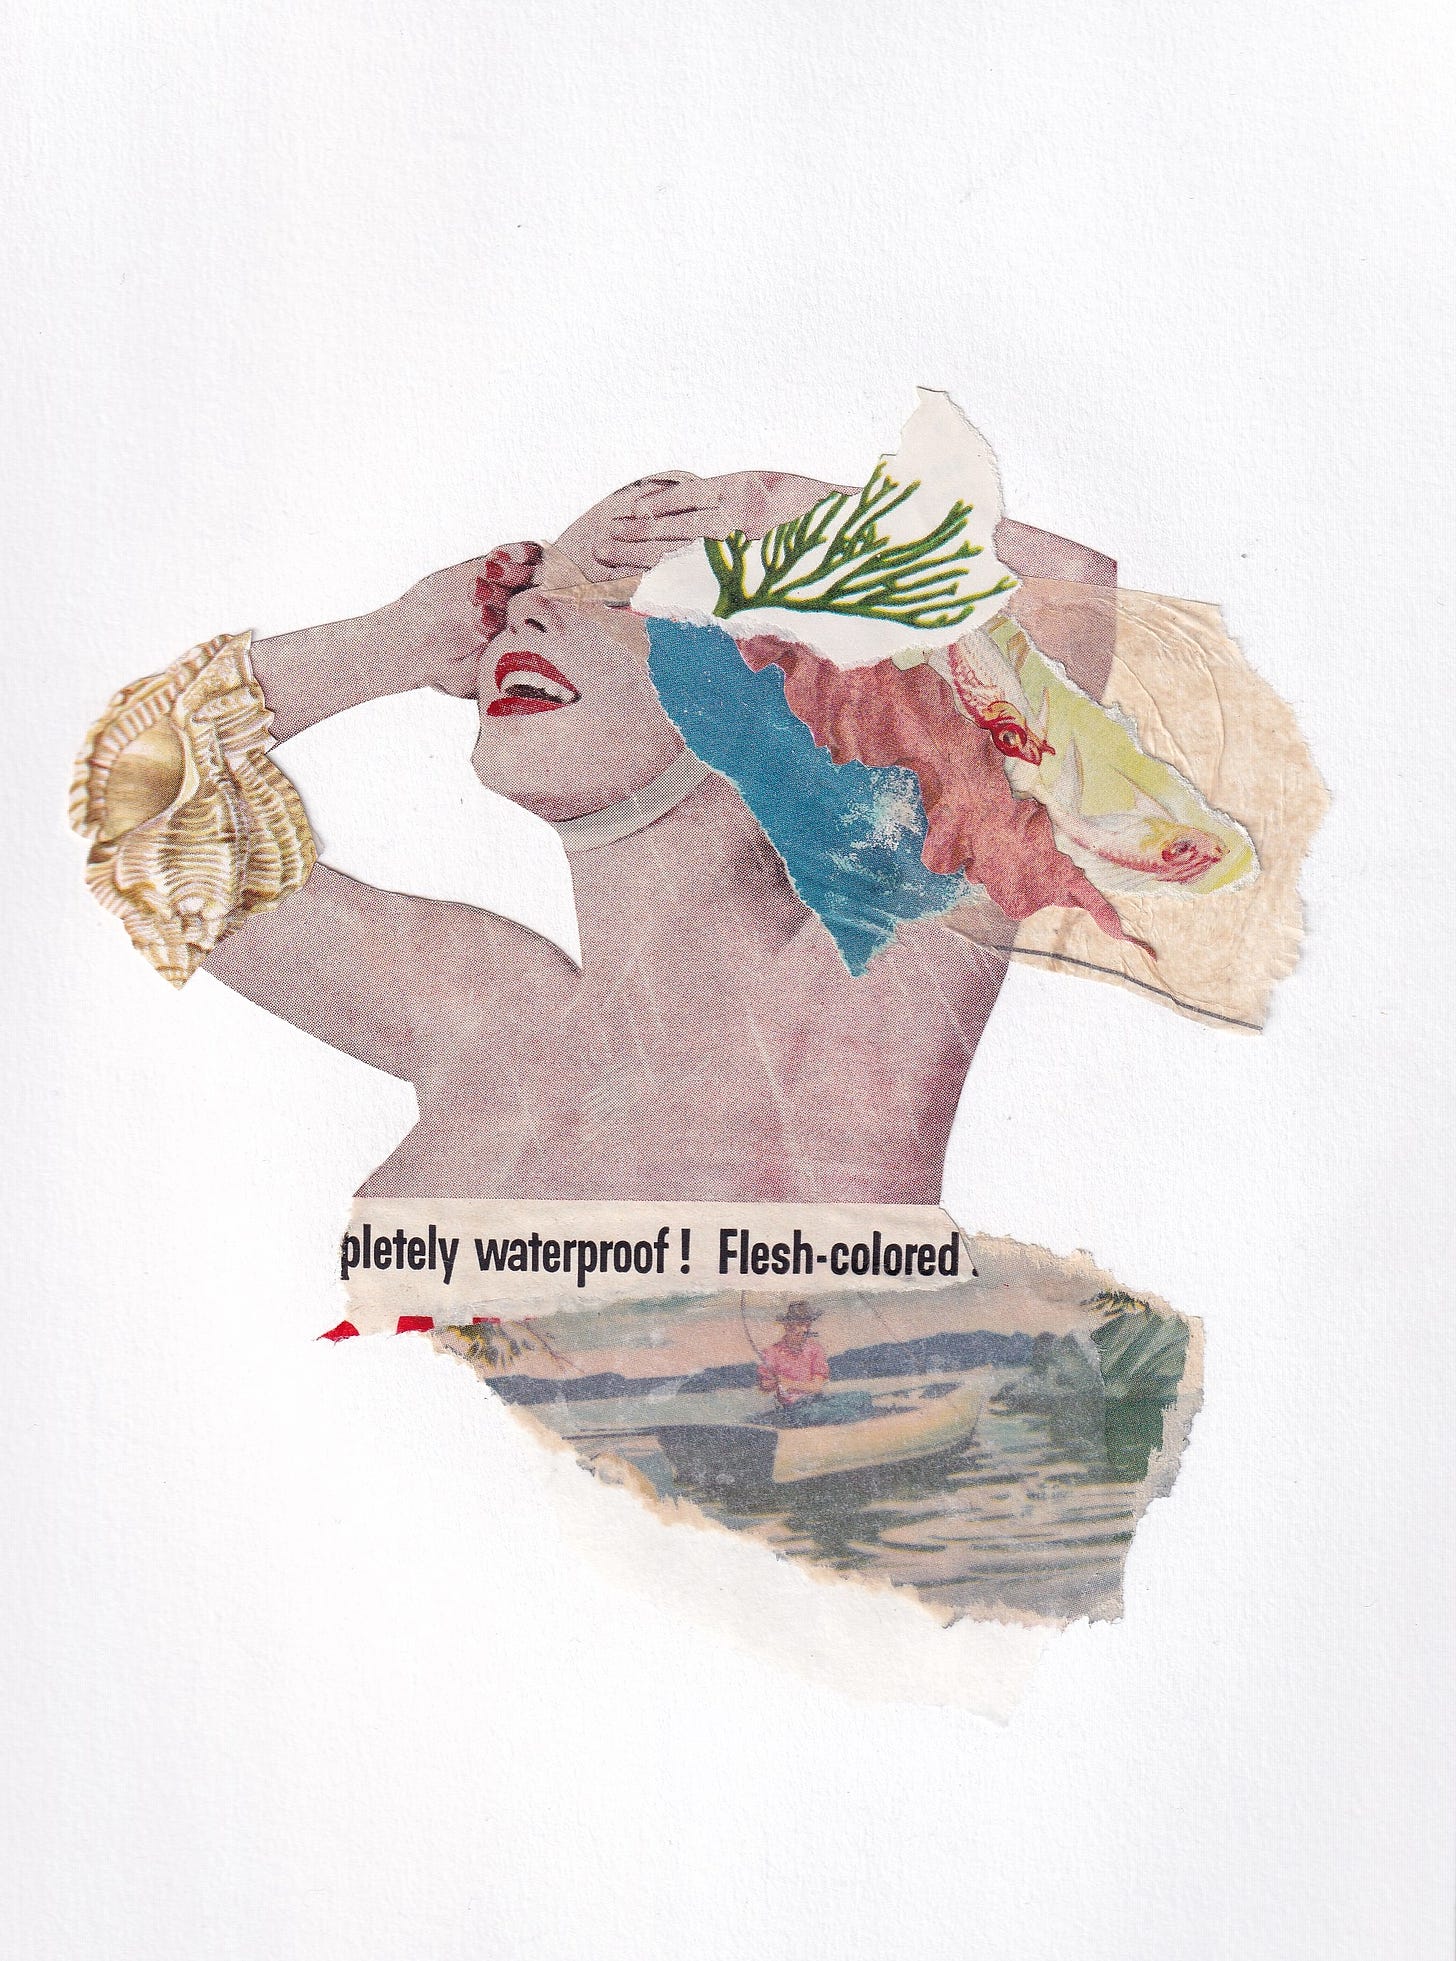 art collage. at center is a swimmer emerging from water, hands over her eyes. her chest is covered by text that reads "letely waterproof! Flesh-colored!" and scraps of ephemera obscure other parts of her body and face